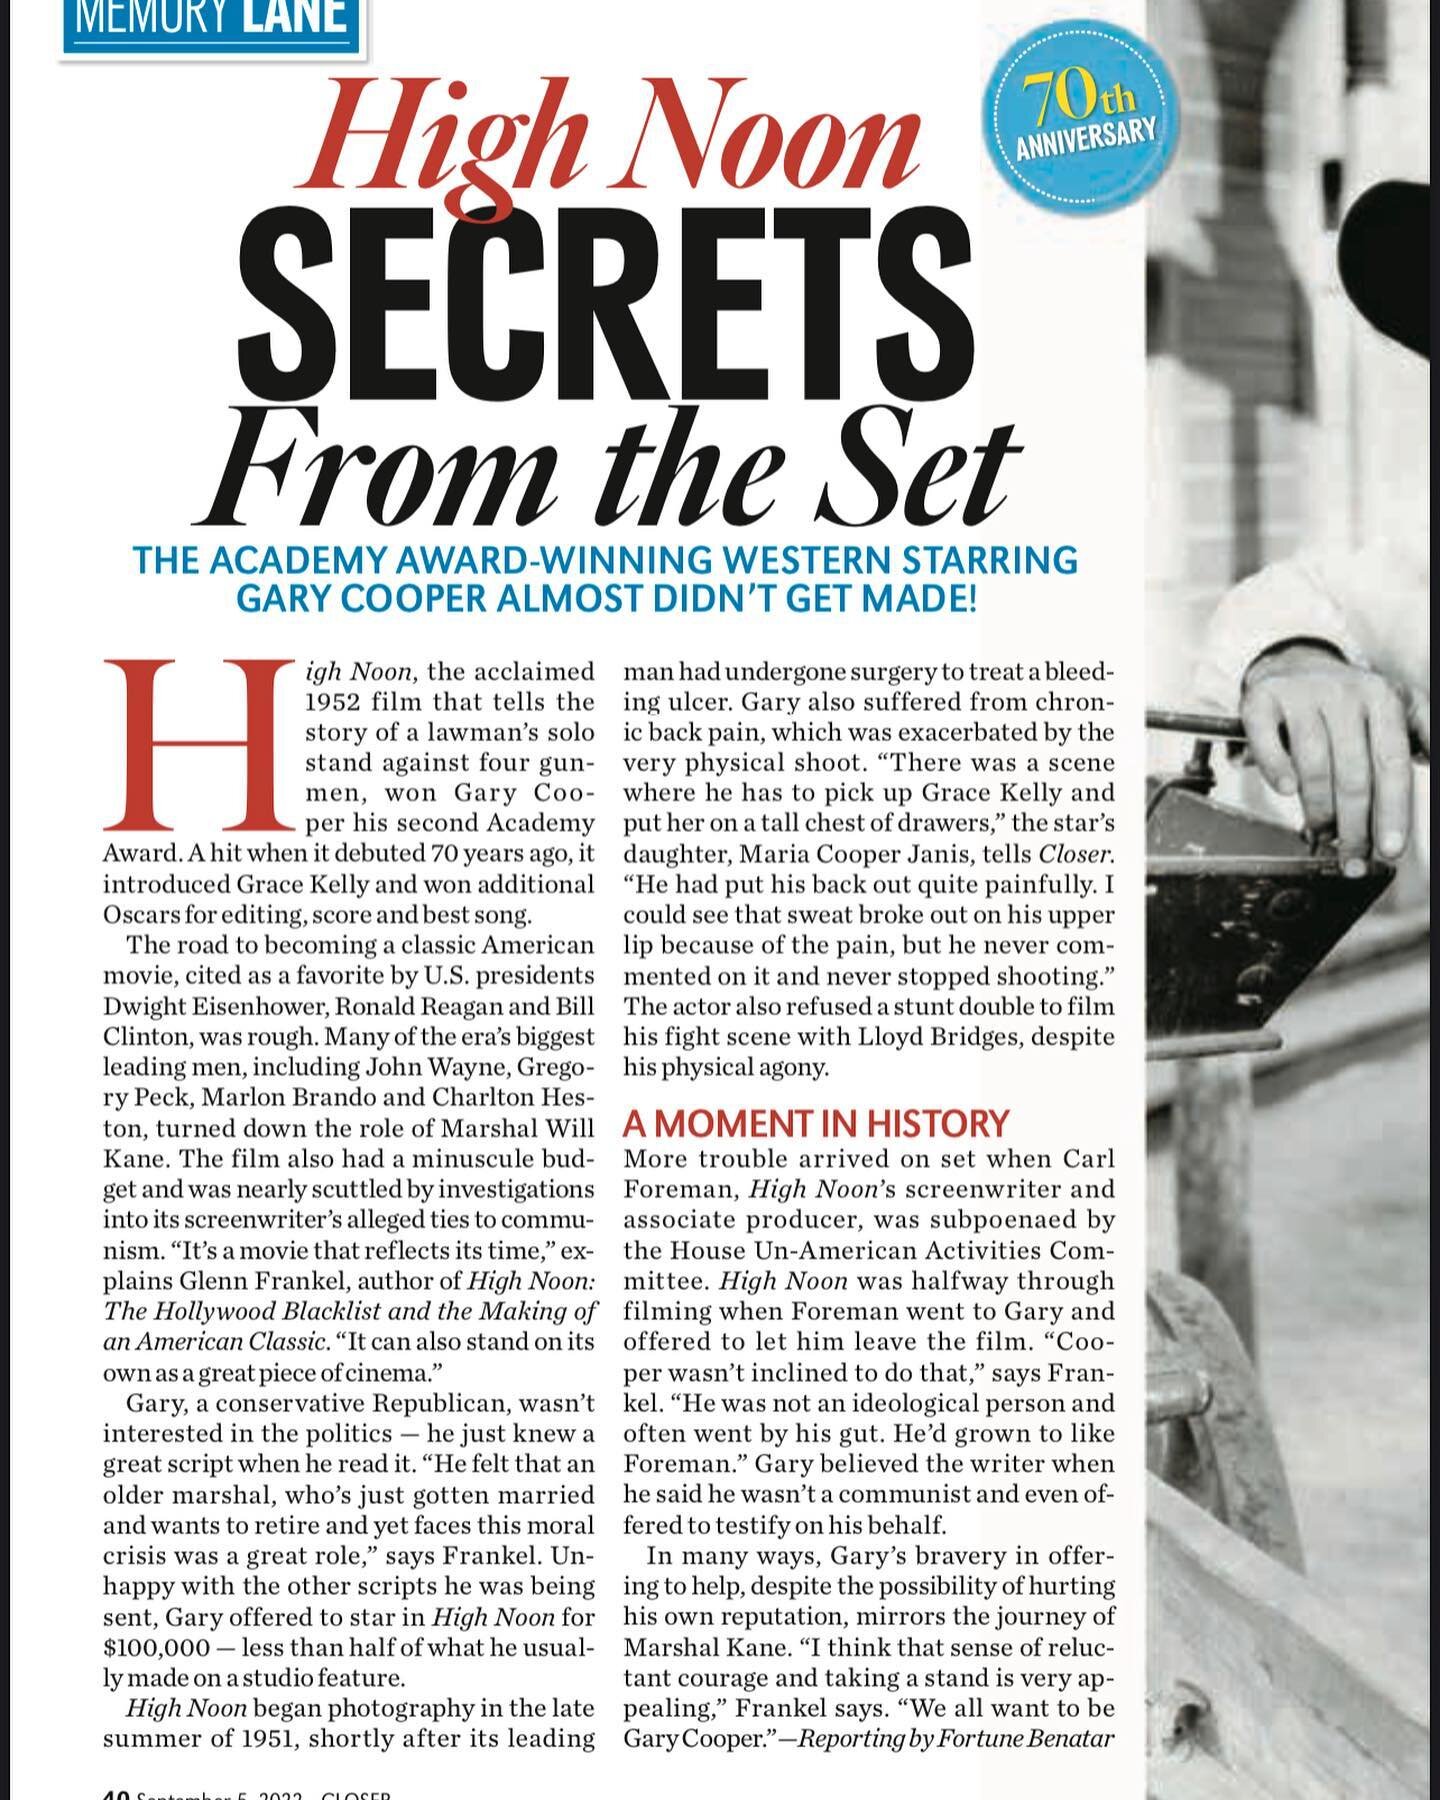 A wonderful peek behind the scenes the quintessential western, HIGH NOON in the September issue of @closerweekly
Lots going on with High Noon this year as it celebrates its 79th anniversary. Stay tuned! 

#garycooper #gracekelly #highnoon #carlforema